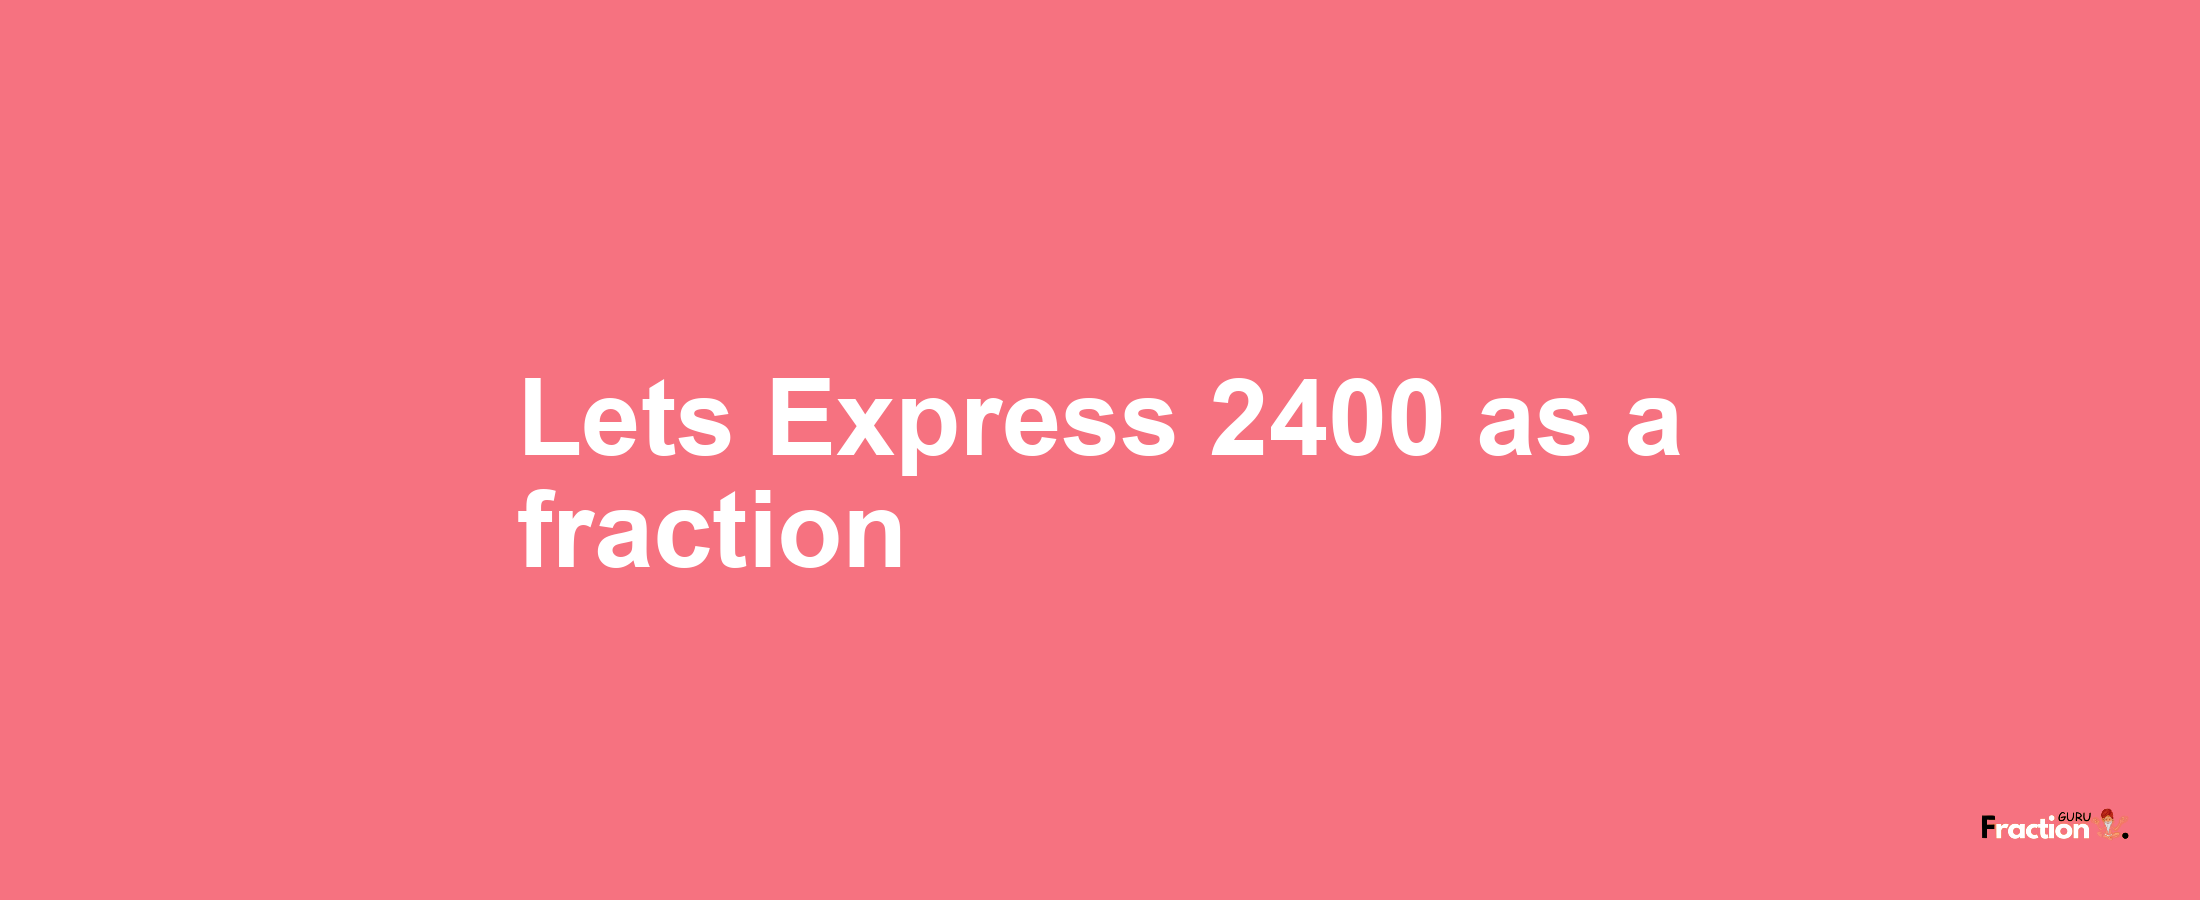 Lets Express 2400 as afraction